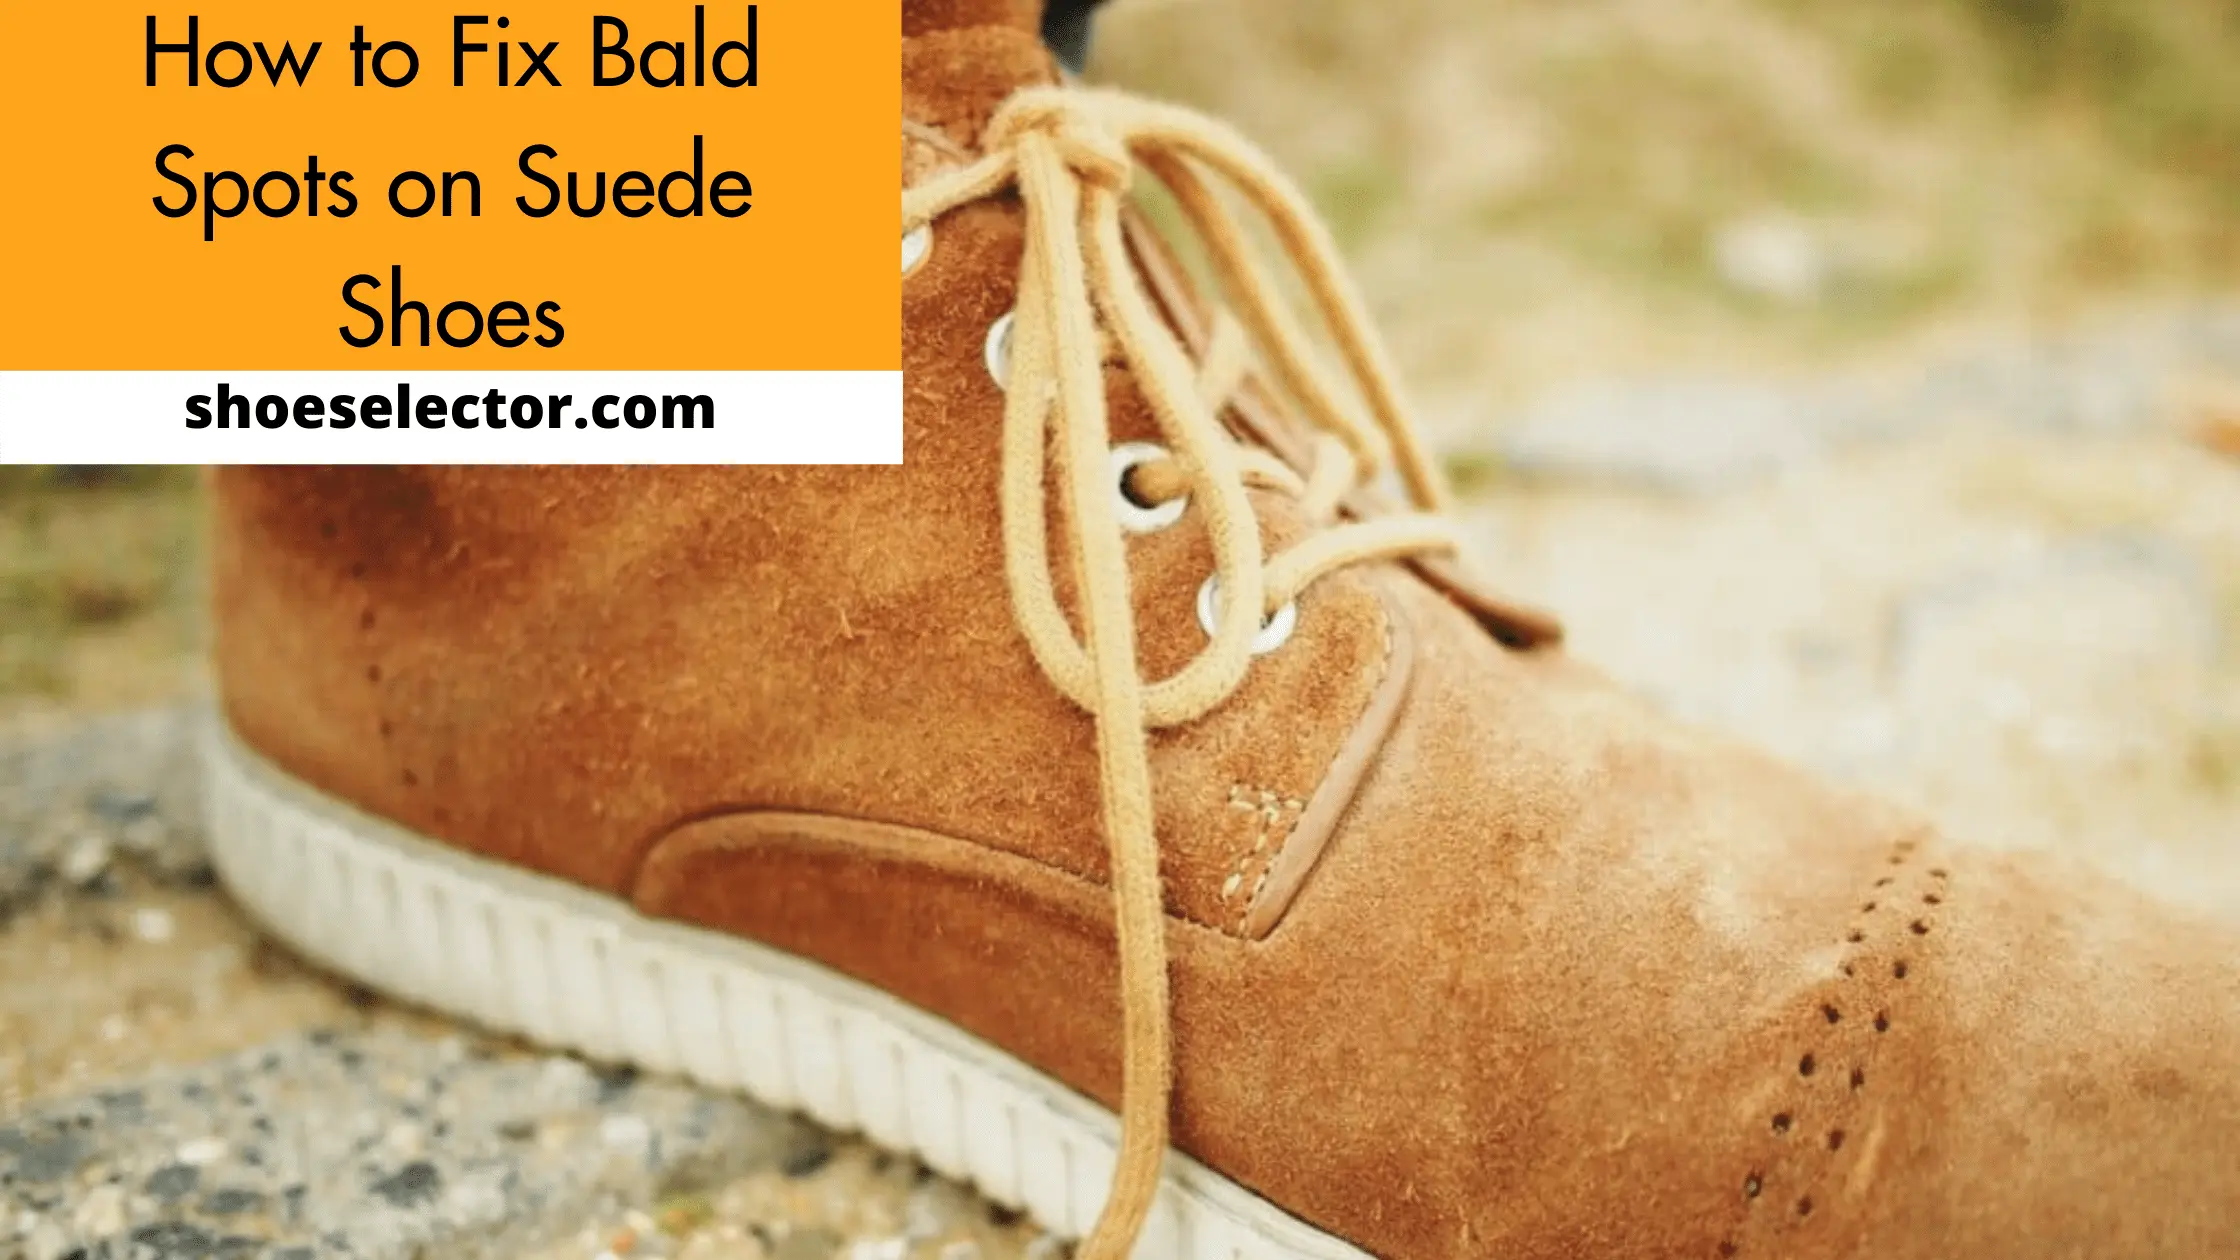 25 How To Fix Bald Spots On Suede Shoes
10/2022